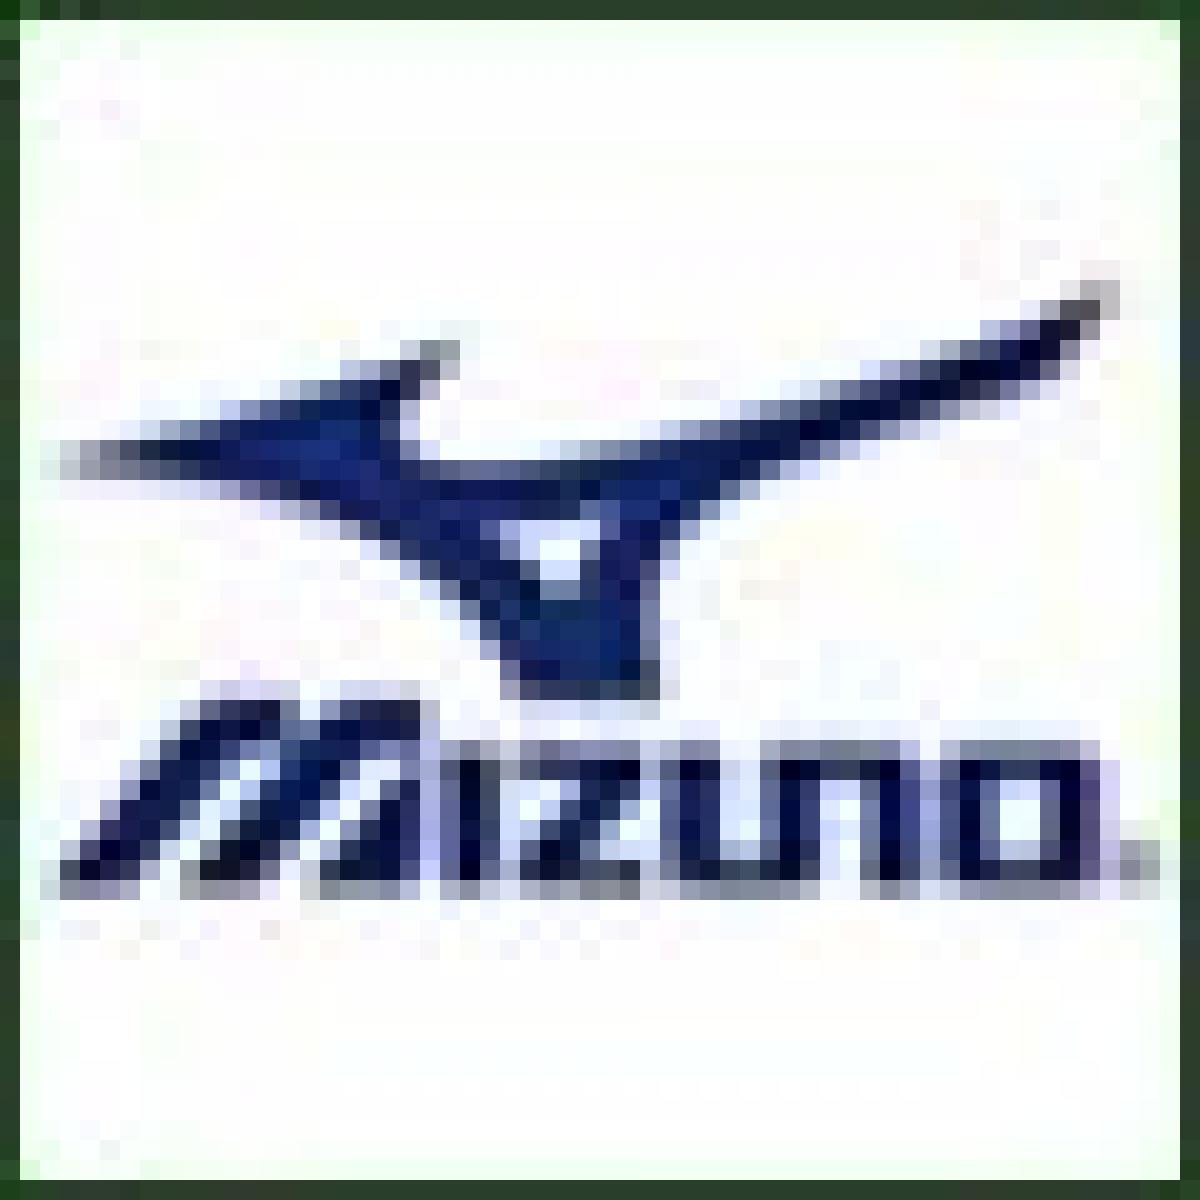 Donald's new deal with Mizuno